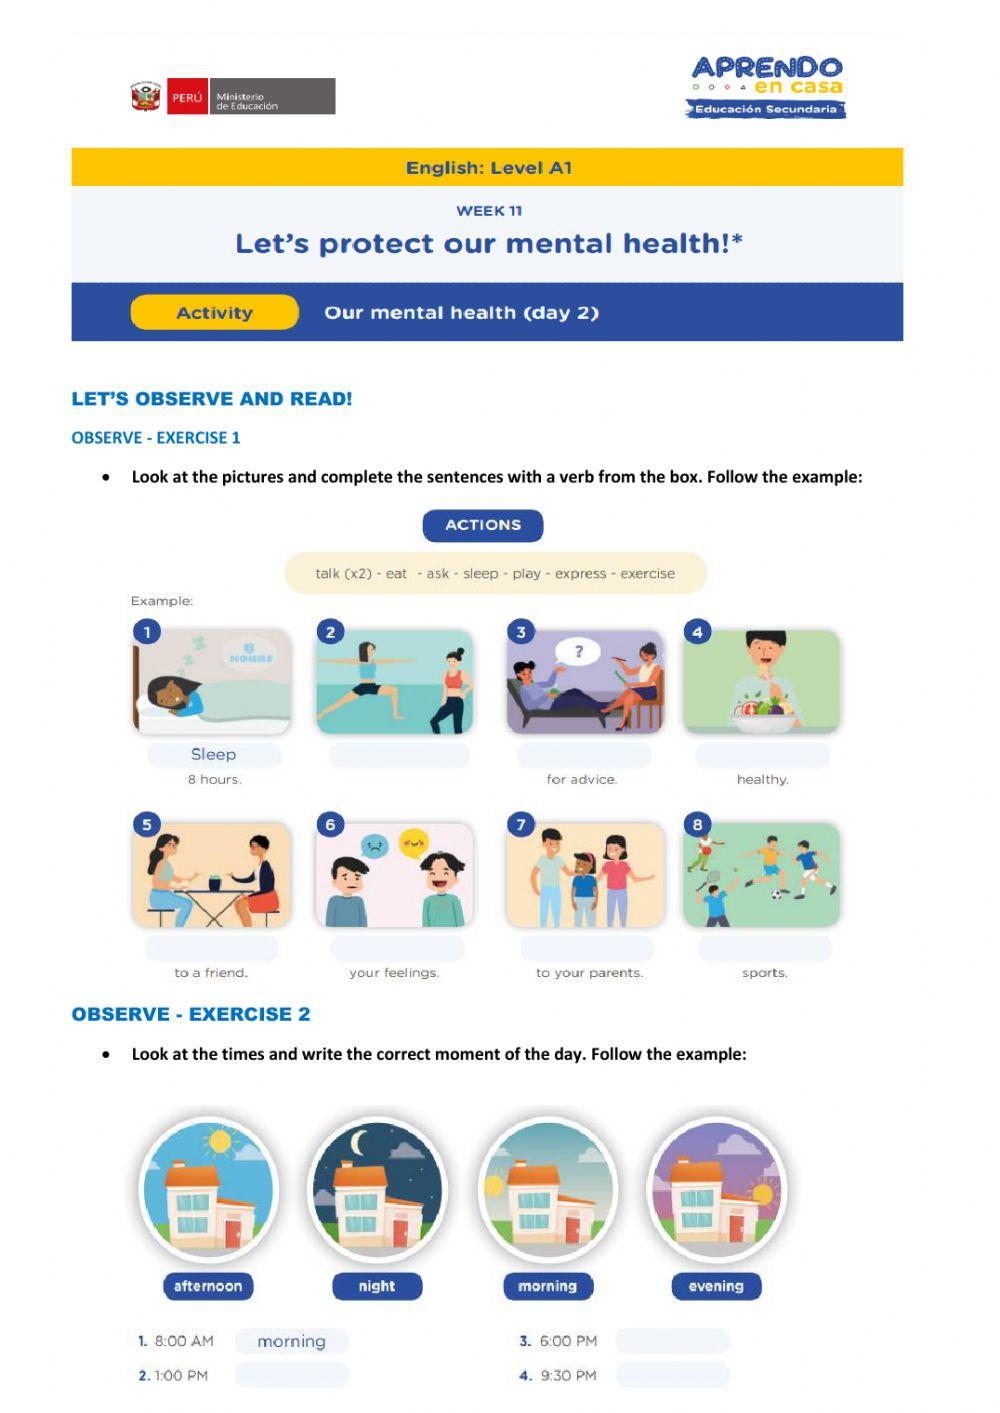 Let's protect our mental health